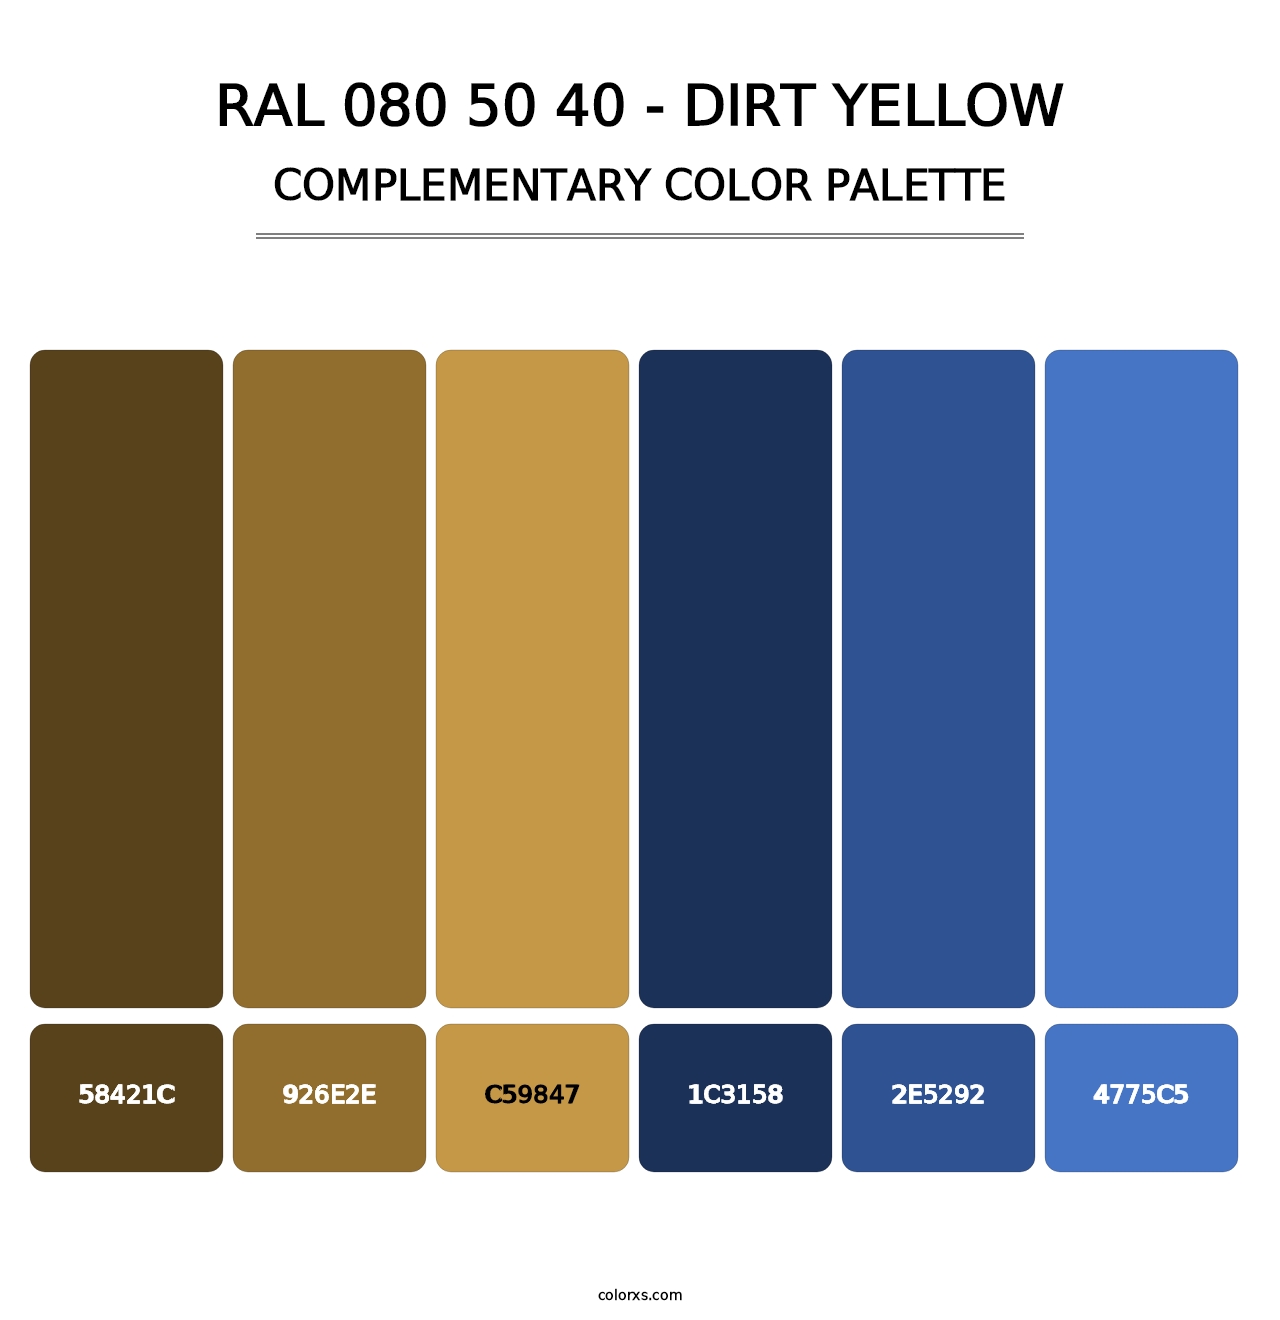 RAL 080 50 40 - Dirt Yellow - Complementary Color Palette